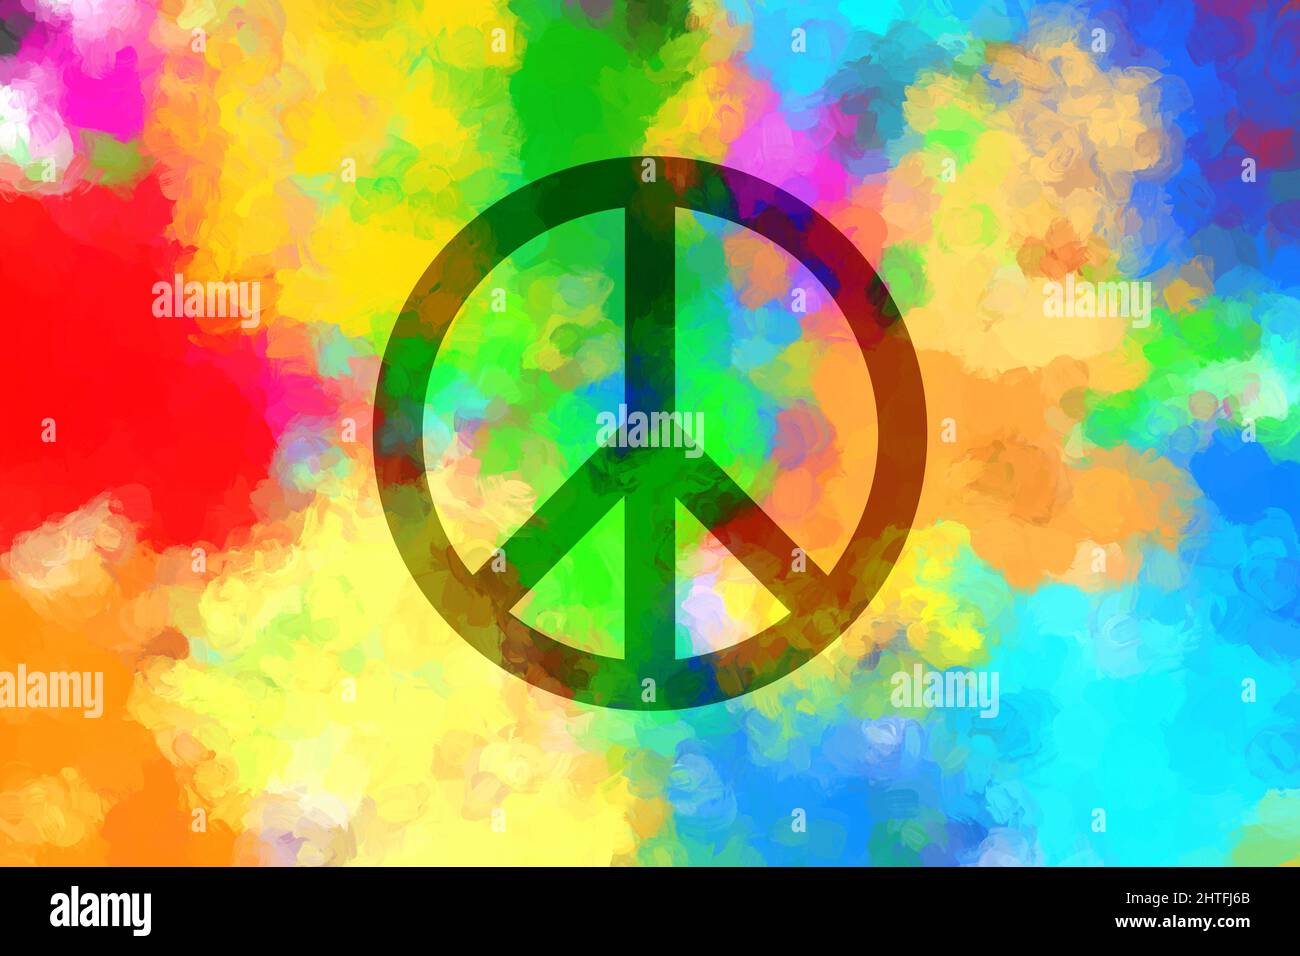 Peace background. Black symbol of peace on colorful watercolor painted background. Stock Photo